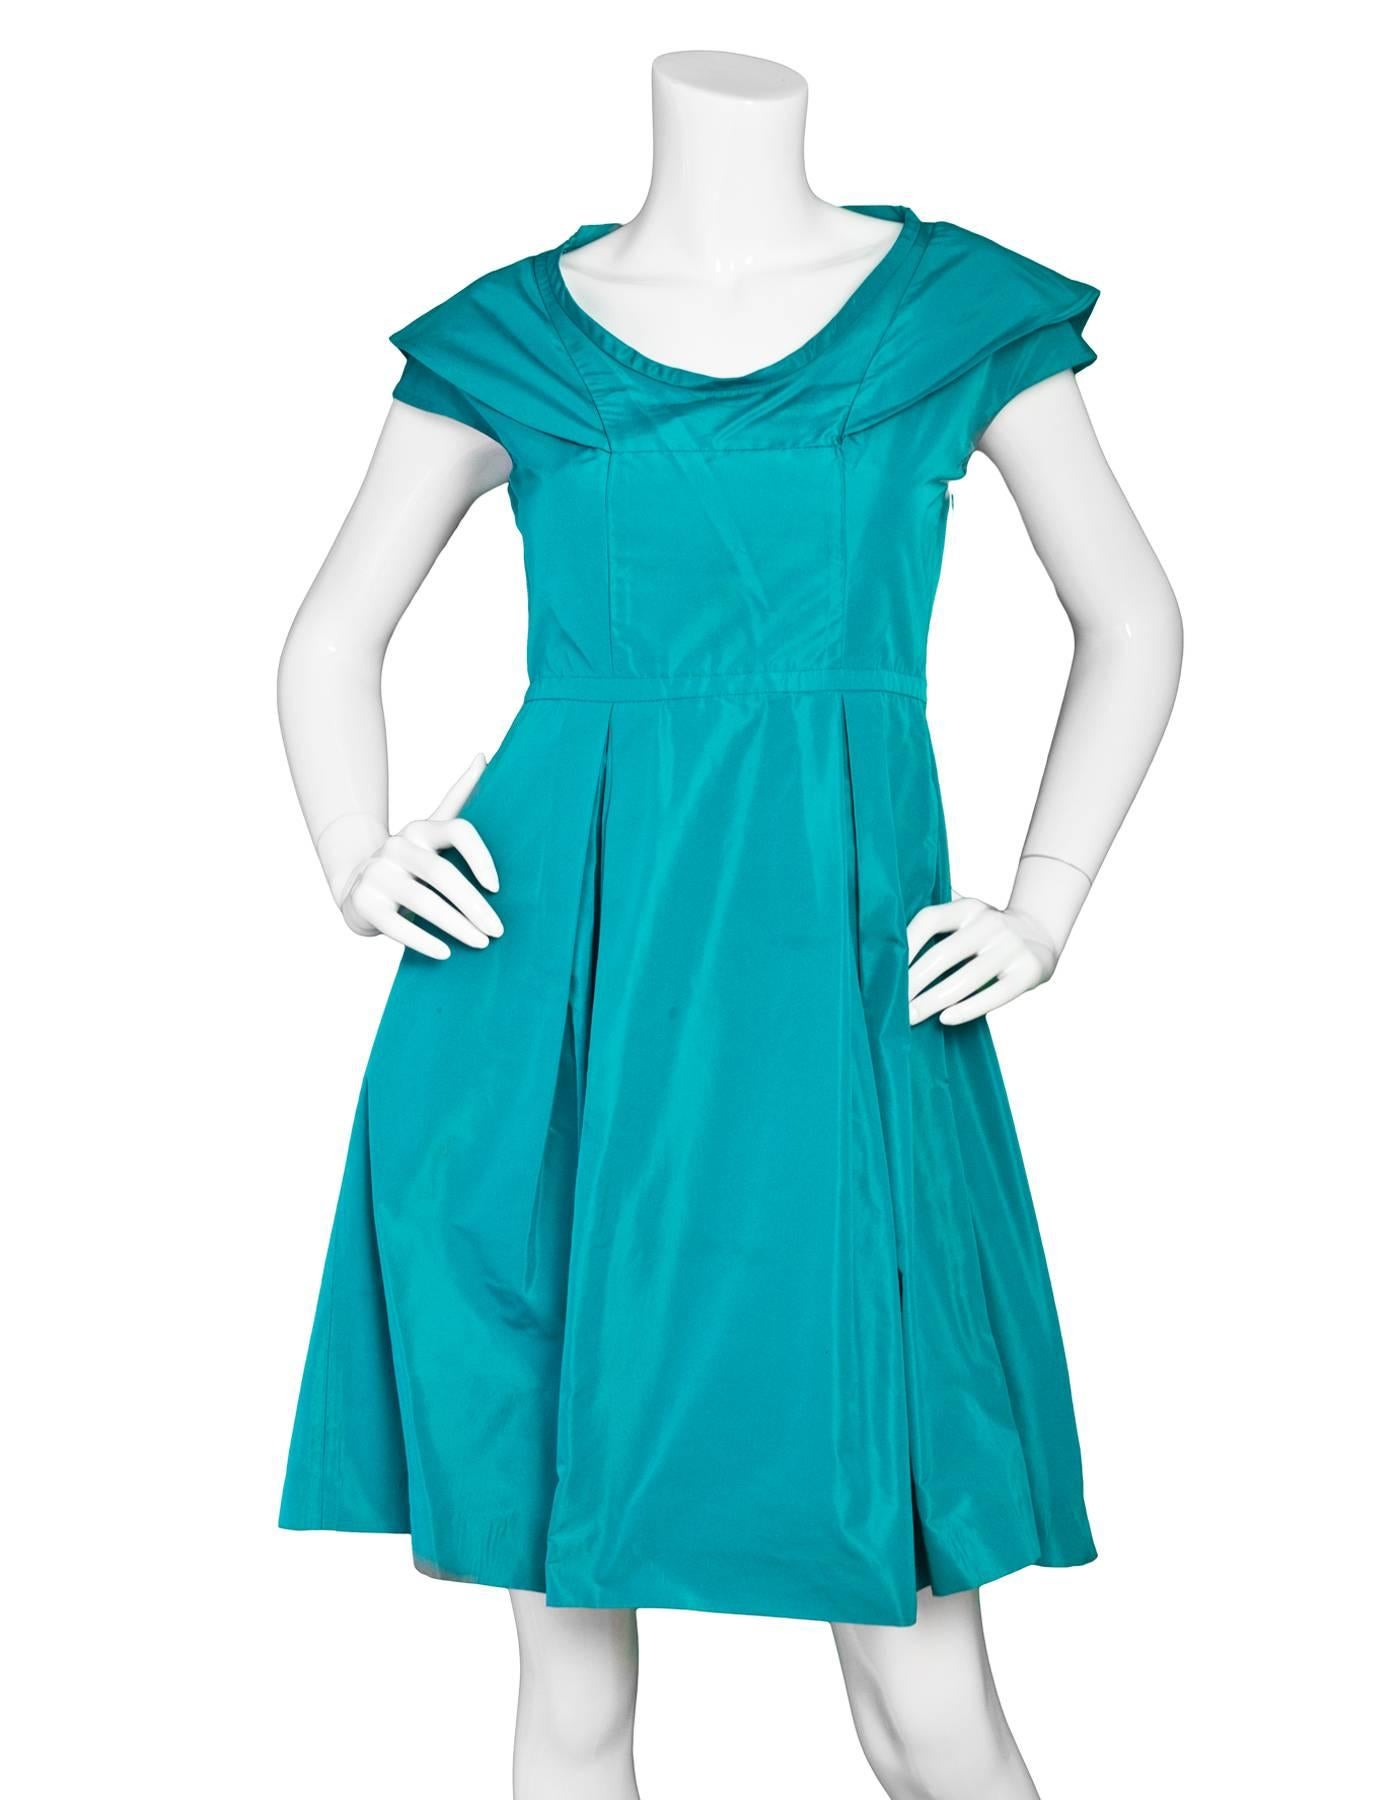 Miu Miu Turquoise Taffeta Pleated Dress 

Made In: Italy
Color: Turquoise
Composition: 55% Polyester, 45% Acetate
Lining: None
Closure/Opening: Side zip closure
Exterior Pockets: Two hip pockets
Interior Pockets: None
Overall Condition: Excellent